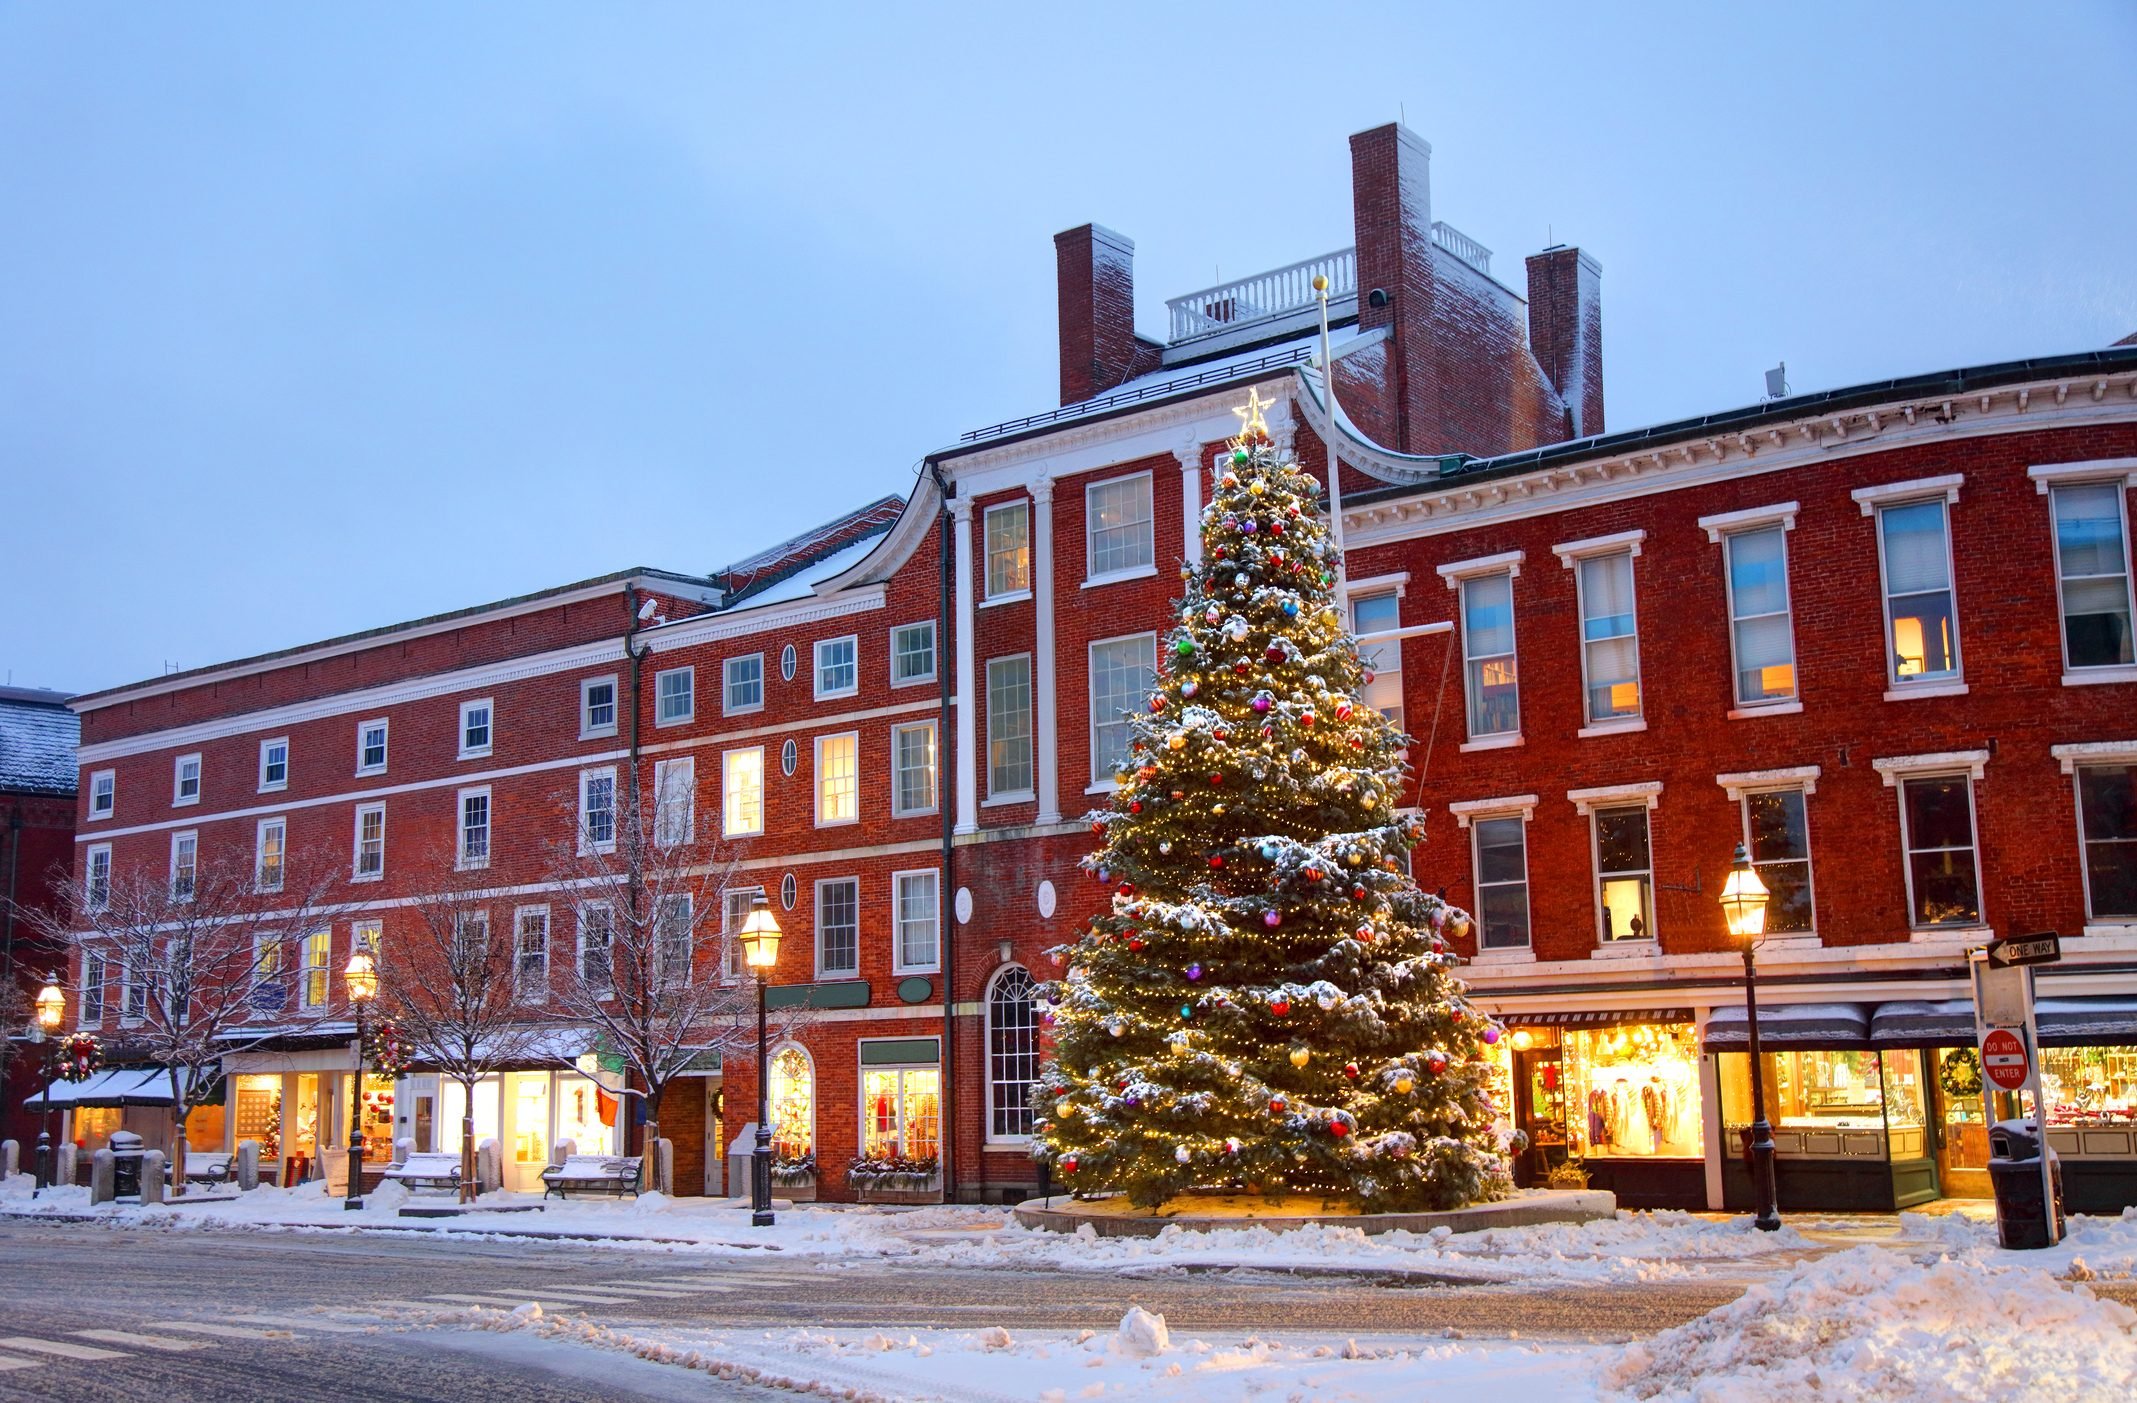 <p><strong>Best for:</strong> A quintessential New England Christmas</p> <p>Complete with snowy scenes and covered bridges, New Hampshire's villages offer the classic Christmas of your dreams. The best of these Christmas towns, though, may be Portsmouth and its Vintage Christmas, which offers a gingerbread house decorating contest, holiday lights parade, musical shows, and beautifully decked out Market Square; while the waterfront living history museum Strawbery Banke features a Candlelight Stroll among decorated historic buildings and outdoor ice-skating.</p> <p>The Hotel Portsmouth, in walking distance of the town's holiday happenings, offers elegant yet simple luxury at reasonable prices in an 1881 Victorian mansion. Claw-foot tubs and fireplaces add to the cozy ambiance.</p> <p class="listicle-page__cta-button-shop"><a class="shop-btn" href="https://www.tripadvisor.com/Hotel_Review-g46209-d5773842-Reviews-The_Hotel_Portsmouth-Portsmouth_New_Hampshire.html">Book Now</a></p>